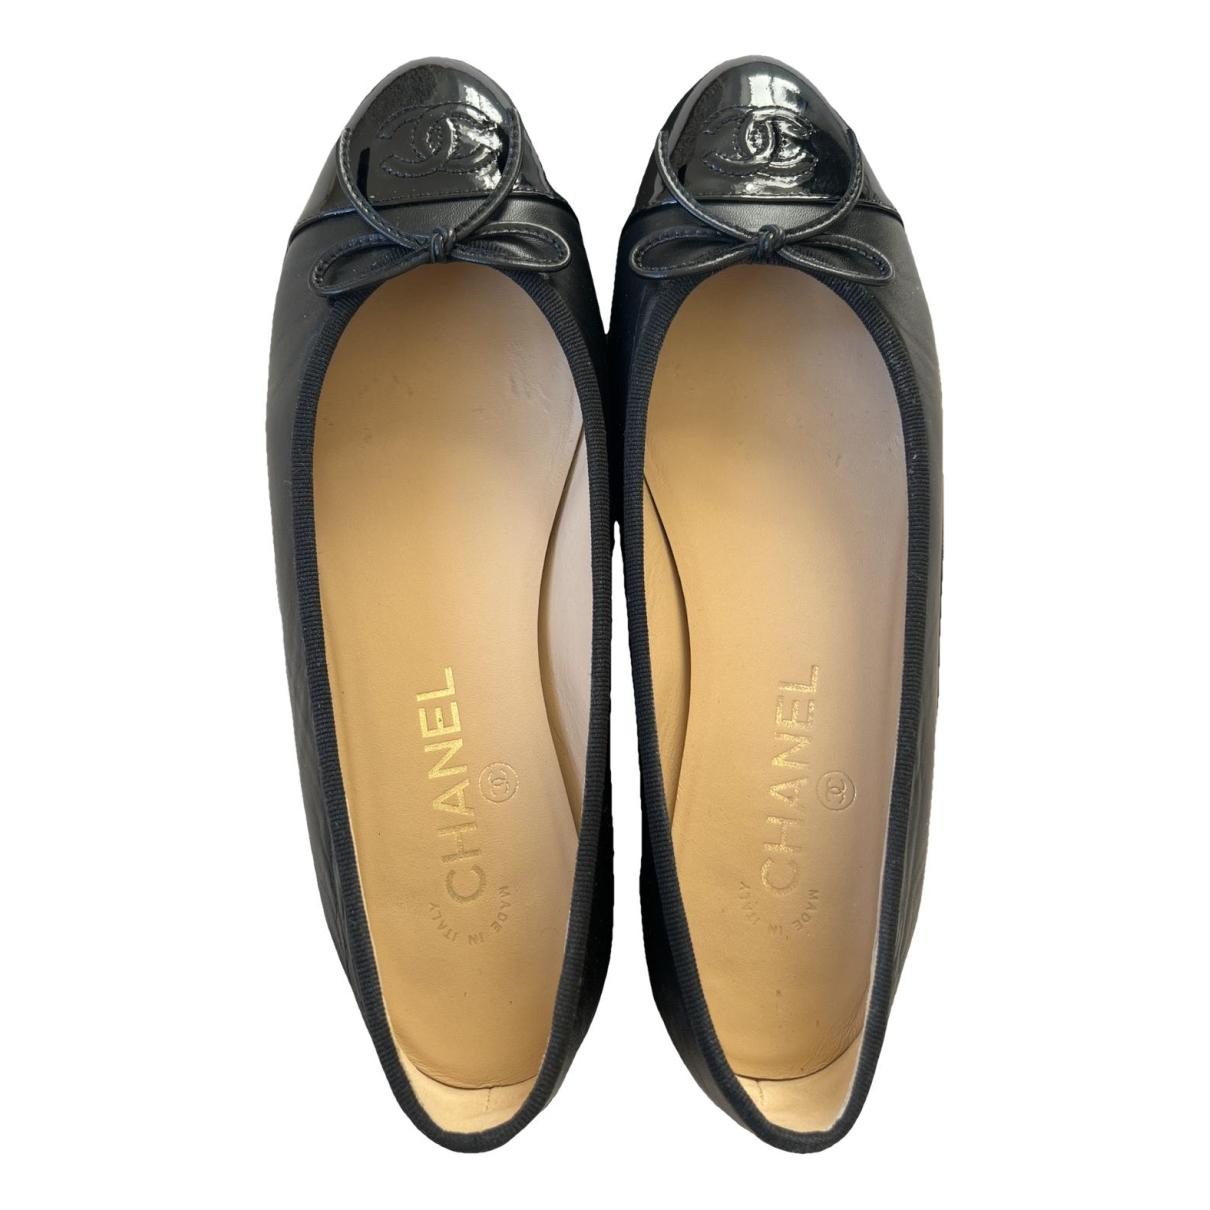 Leather ballet flats Chanel Black size 38.5 EU in Leather - 37690761 | Vestiaire Collective (Global)